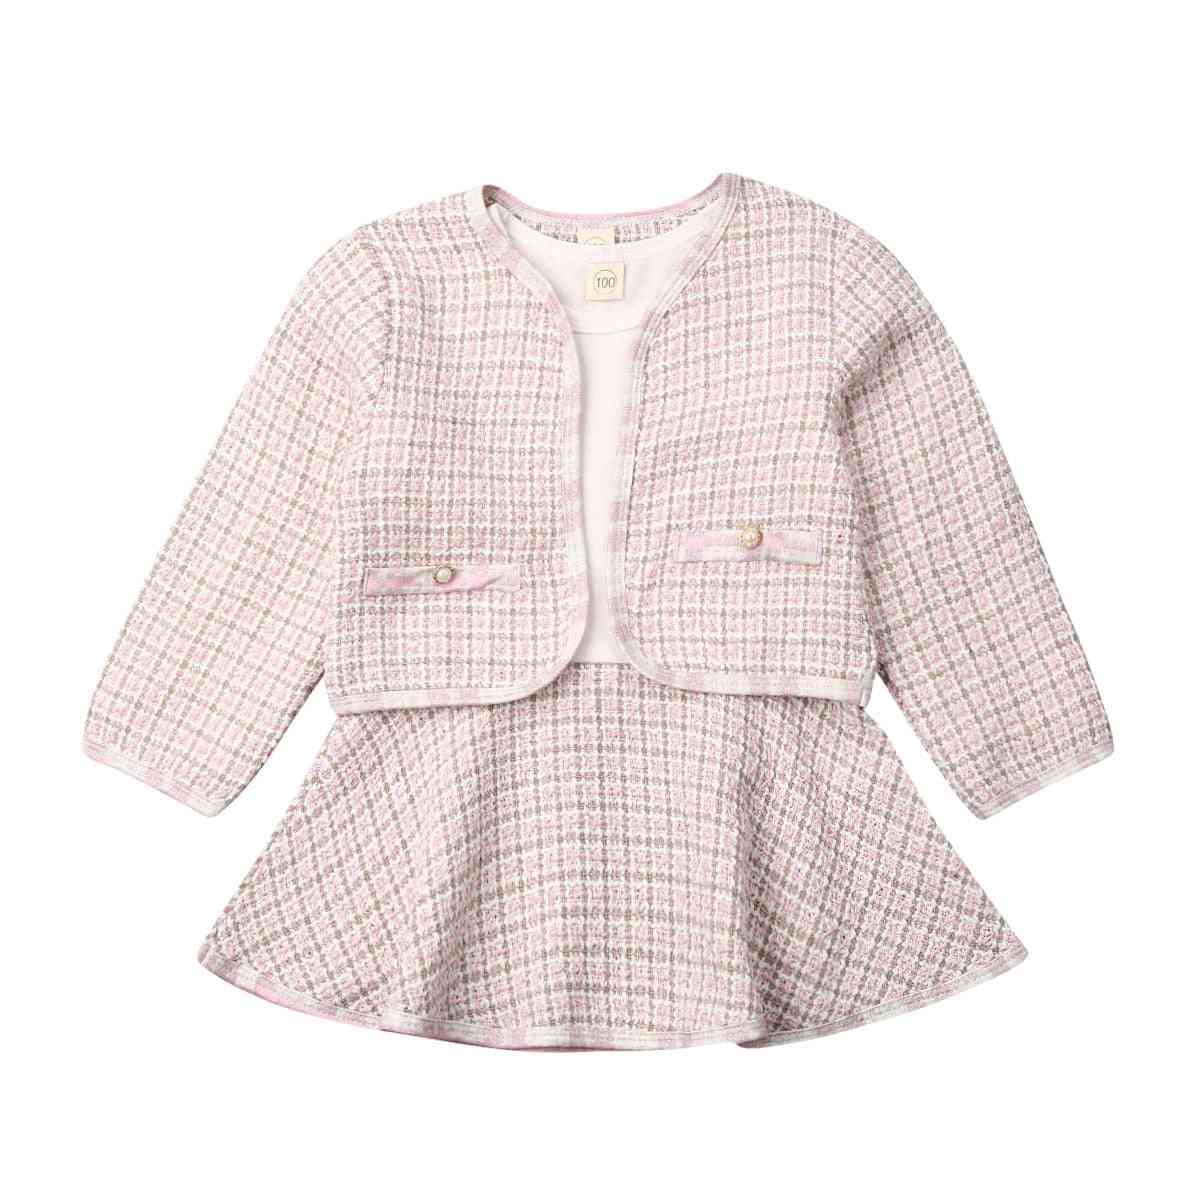 Mode Kinder Baby Outfits